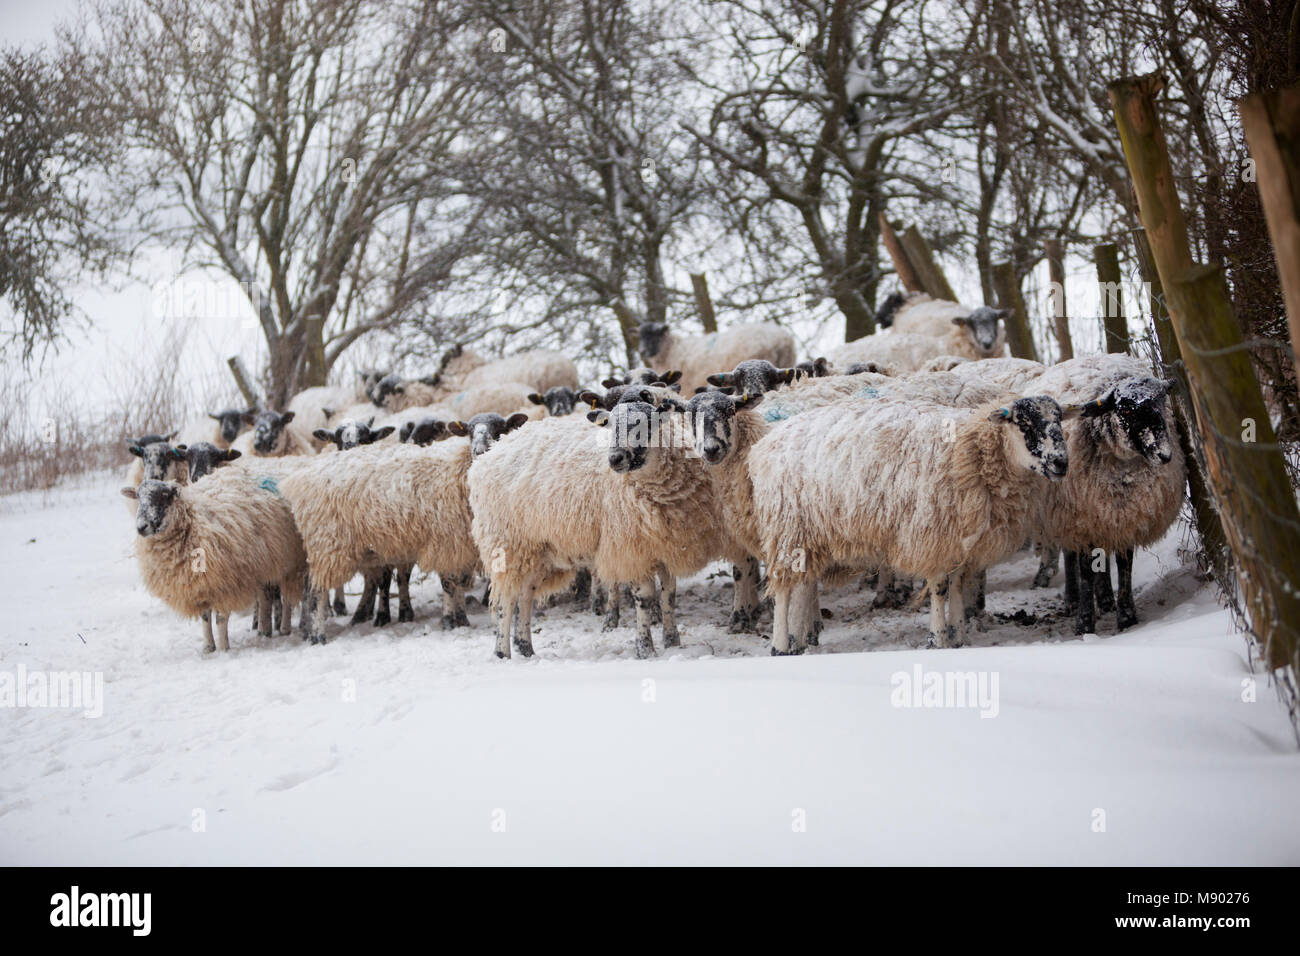 White sheep huddled together sheltering from a snow storm, Chipping Campden, The Cotswolds, Gloucestershire, England, United Kingdom, Europe Stock Photo